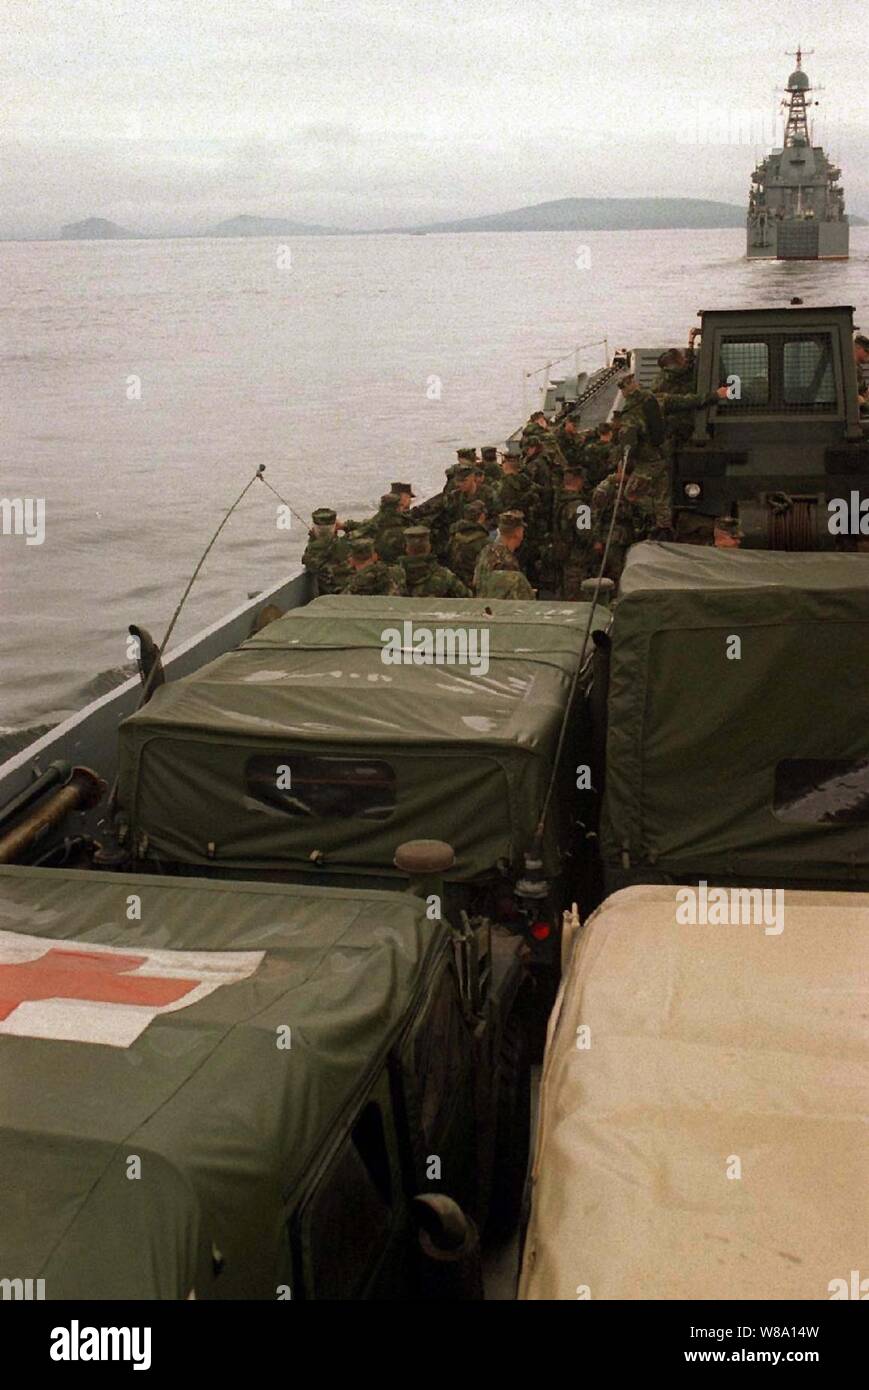 A U.S. Navy landing craft loaded with medical vehicles and supplies for a simulated disaster-relief exercise follows a Russian Ropuchhka II amphibious assault ship on Aug. 14, 1996, during Exercise Cooperation From the Sea '96, near Vladivostok, Russia.  U.S. Navy and Marine Corps units of the 7th Fleet and Russian Federation Navy units are conducting the exercise near the port city of Vladivostok.  The purpose of the exercise is to improve interoperability with Russian military forces in conducting disaster relief and humanitarian missions.  Personnel exchanges and training will promote coope Stock Photo